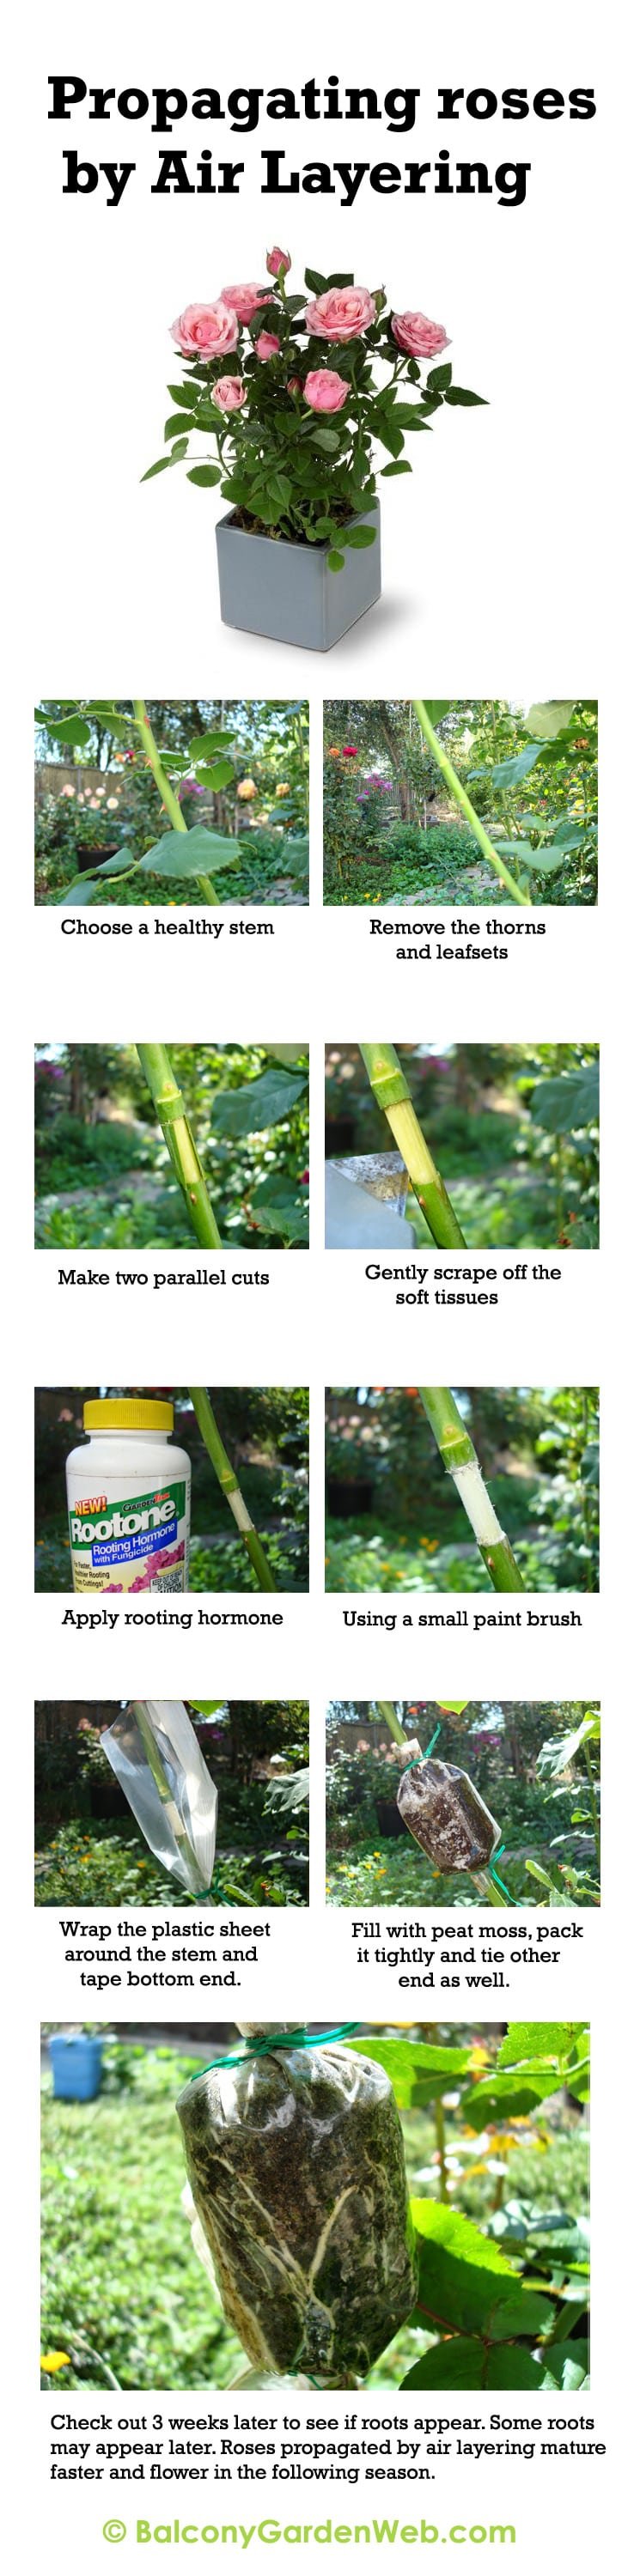 Infographic : How to propagate rose by air layering. More amazing info in this post.